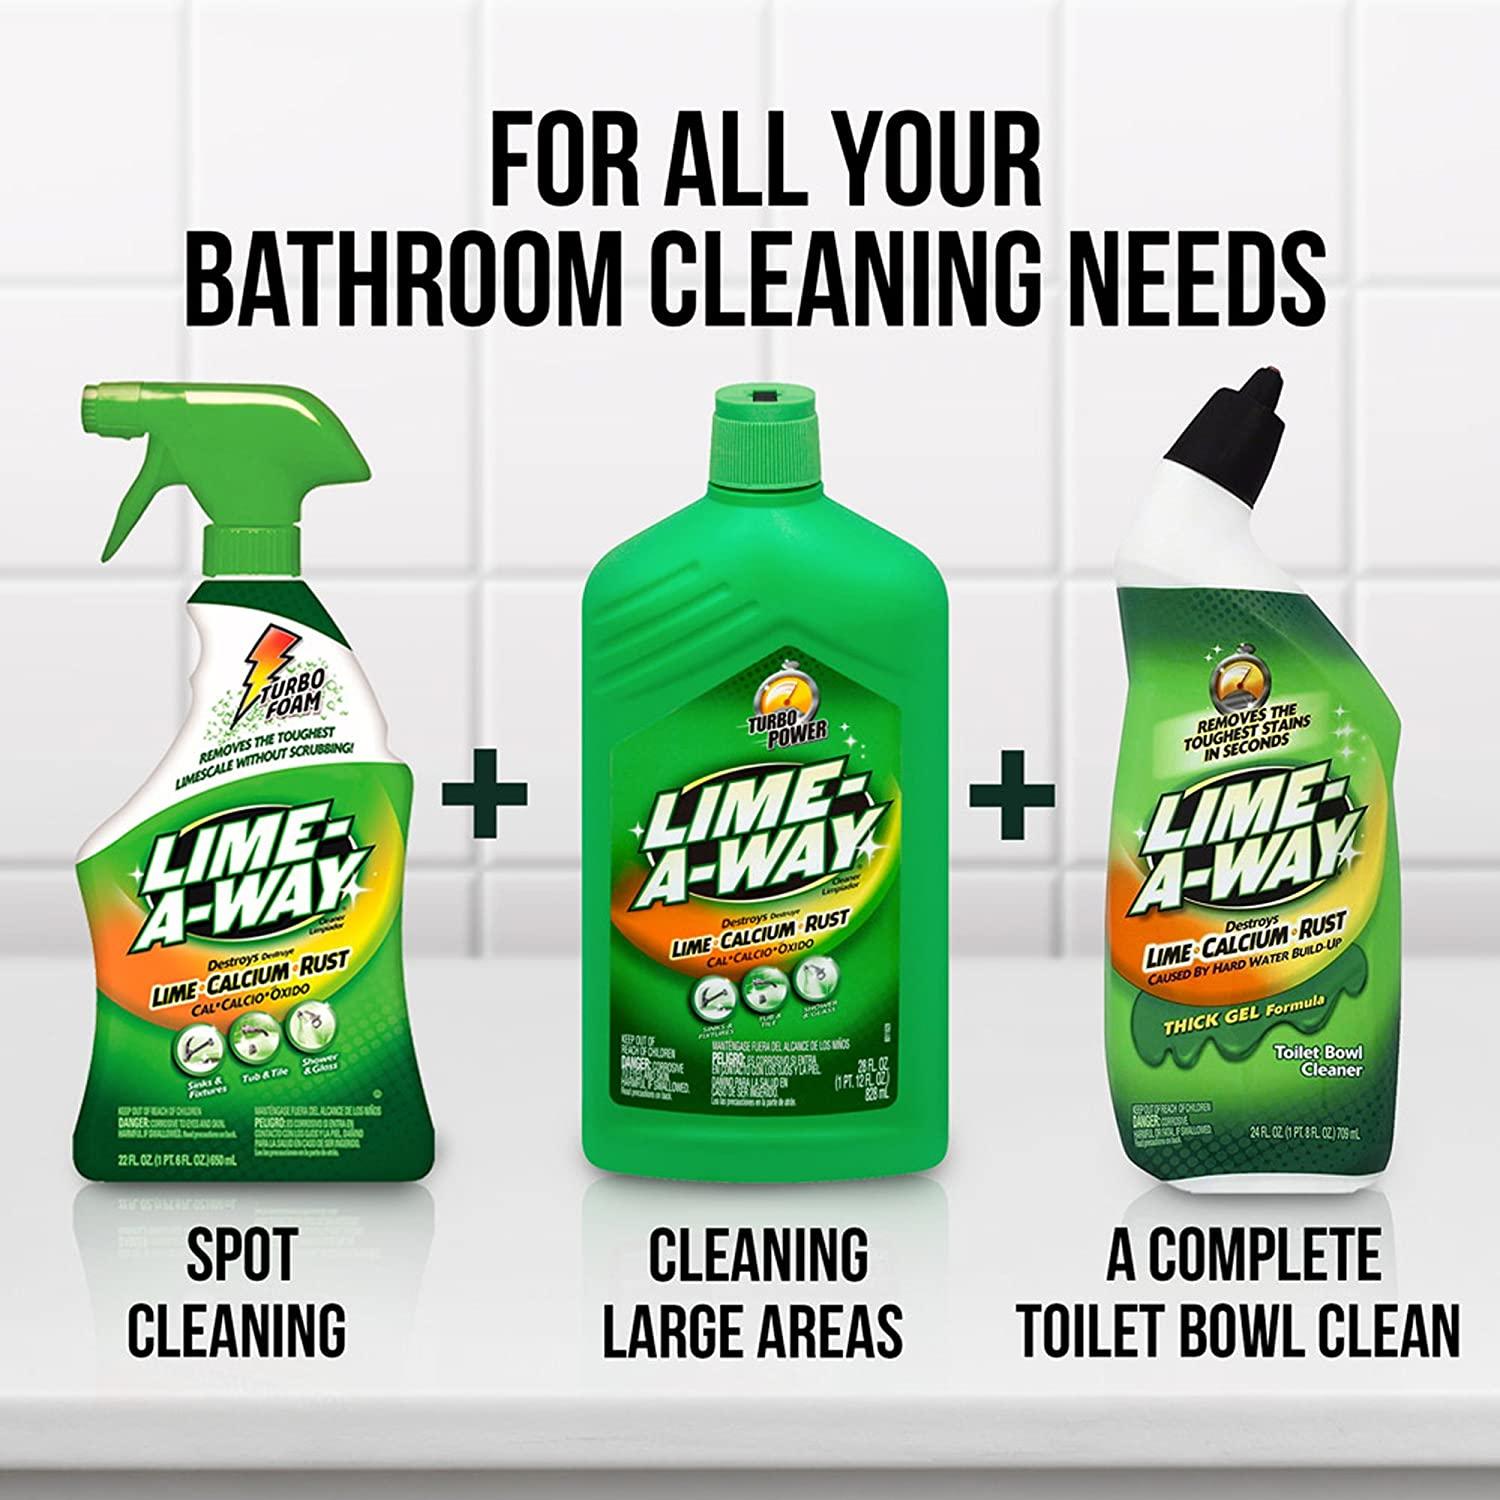 BATHROOM CLEANING, DOLLAR TREE PRODUCTS